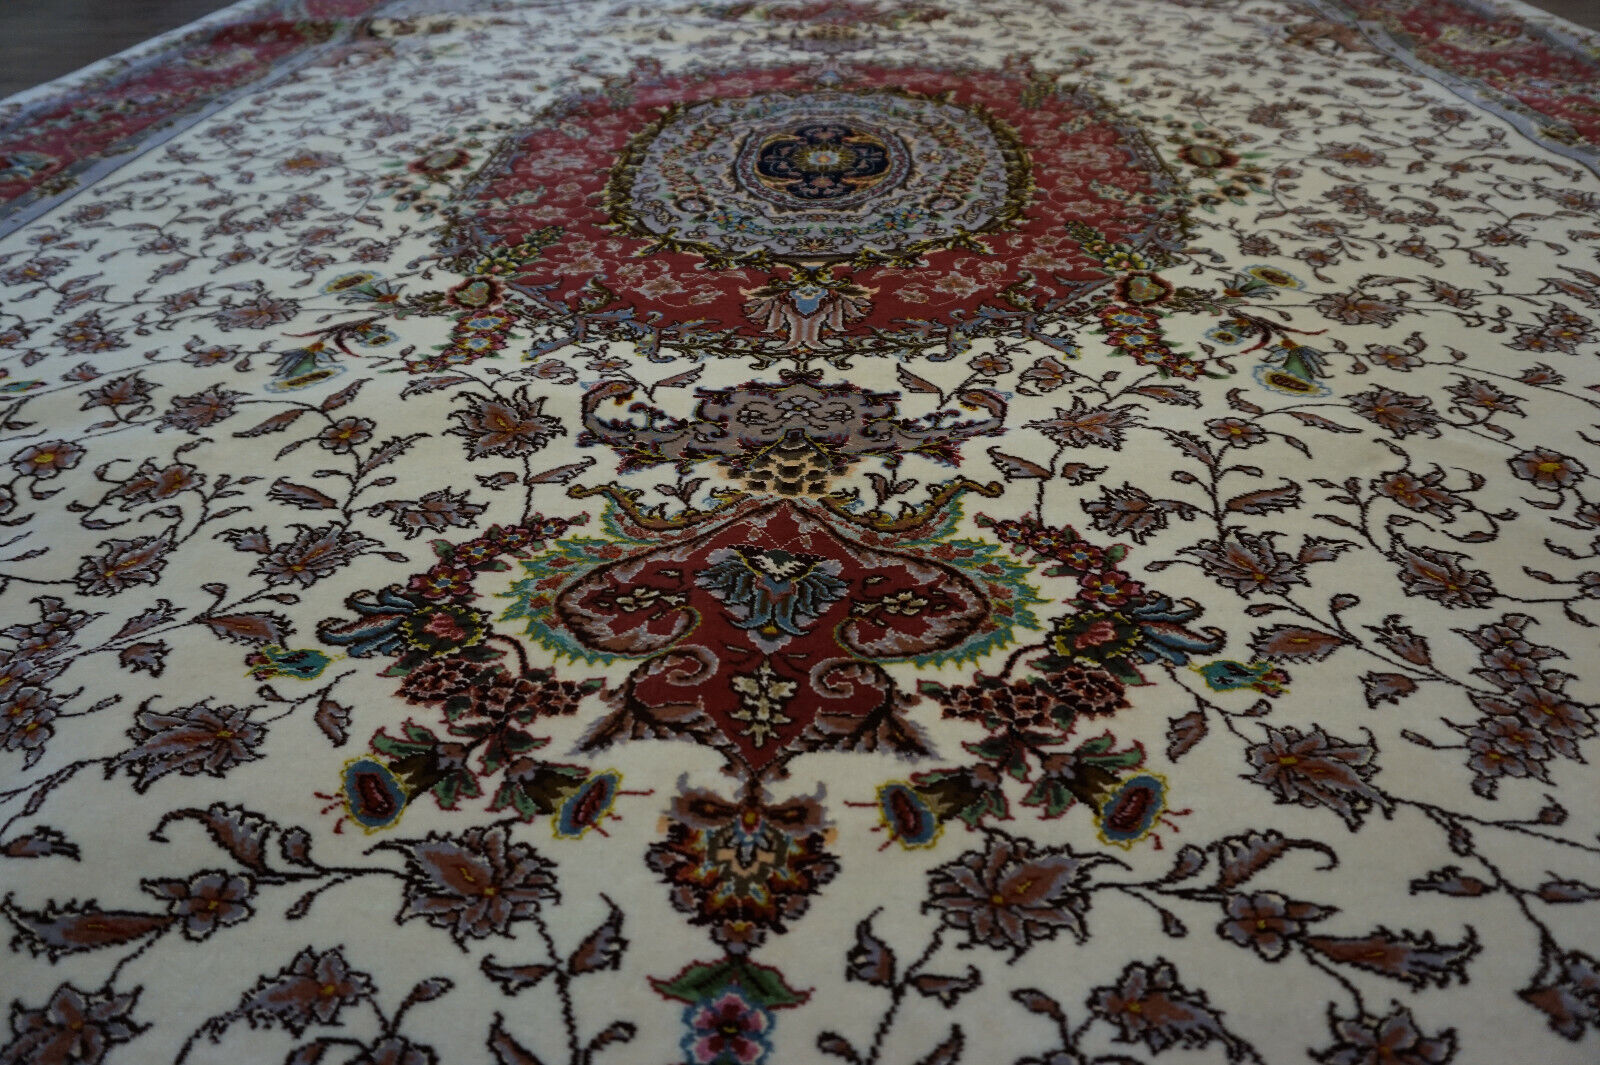 Close-up of the intricate central medallion and floral motifs on the Persian Tabriz rug